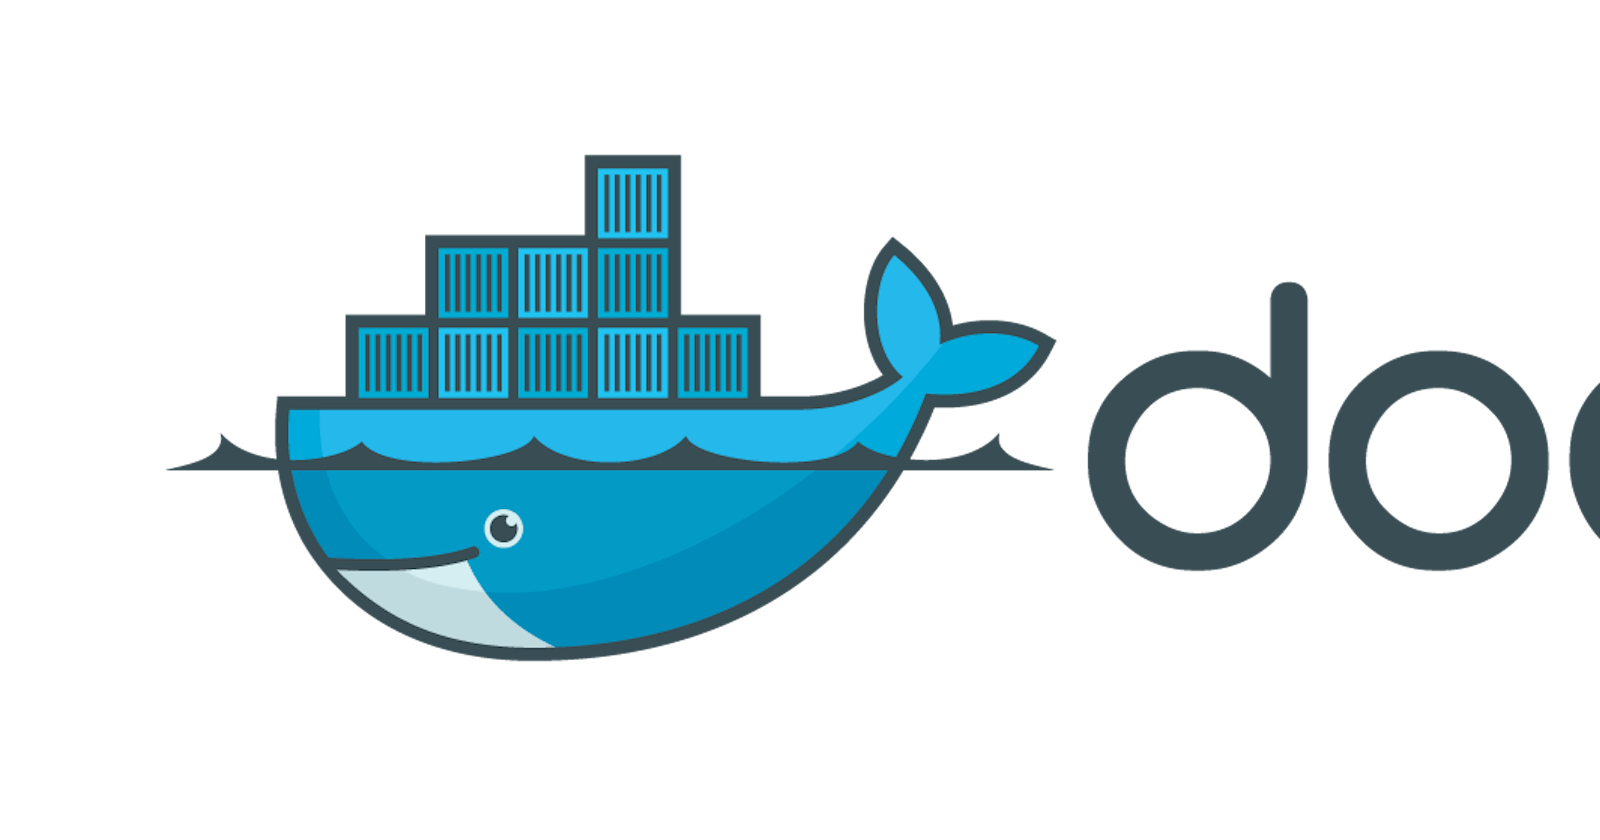 How do you build your own Docker Image with zero dependencies?